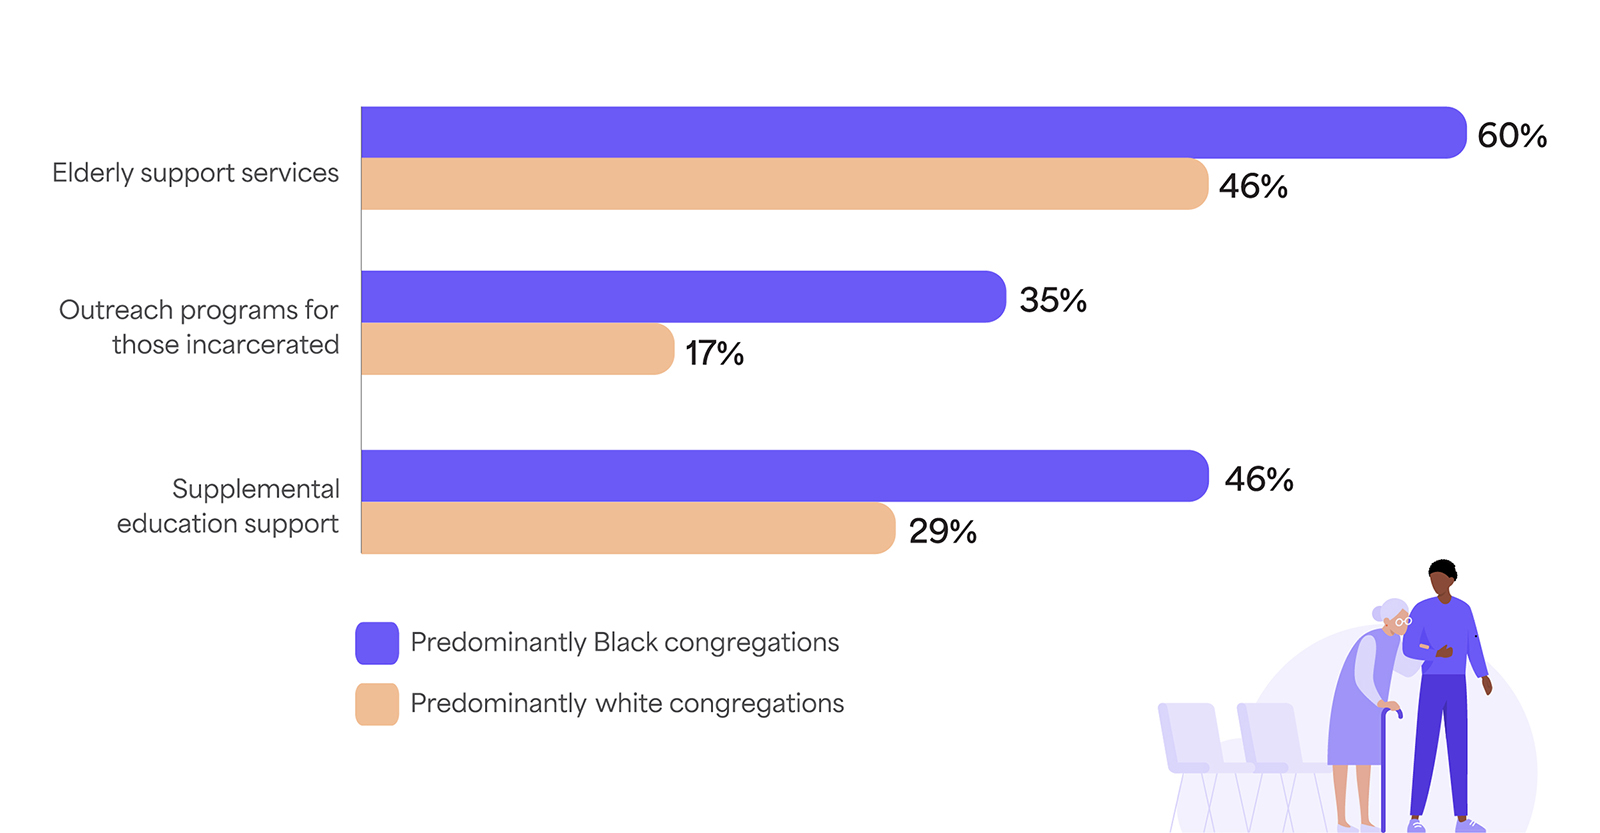 "Factors Considered by Black versus White Congregations Championing Outreach" (Graphic courtesy Givelify)